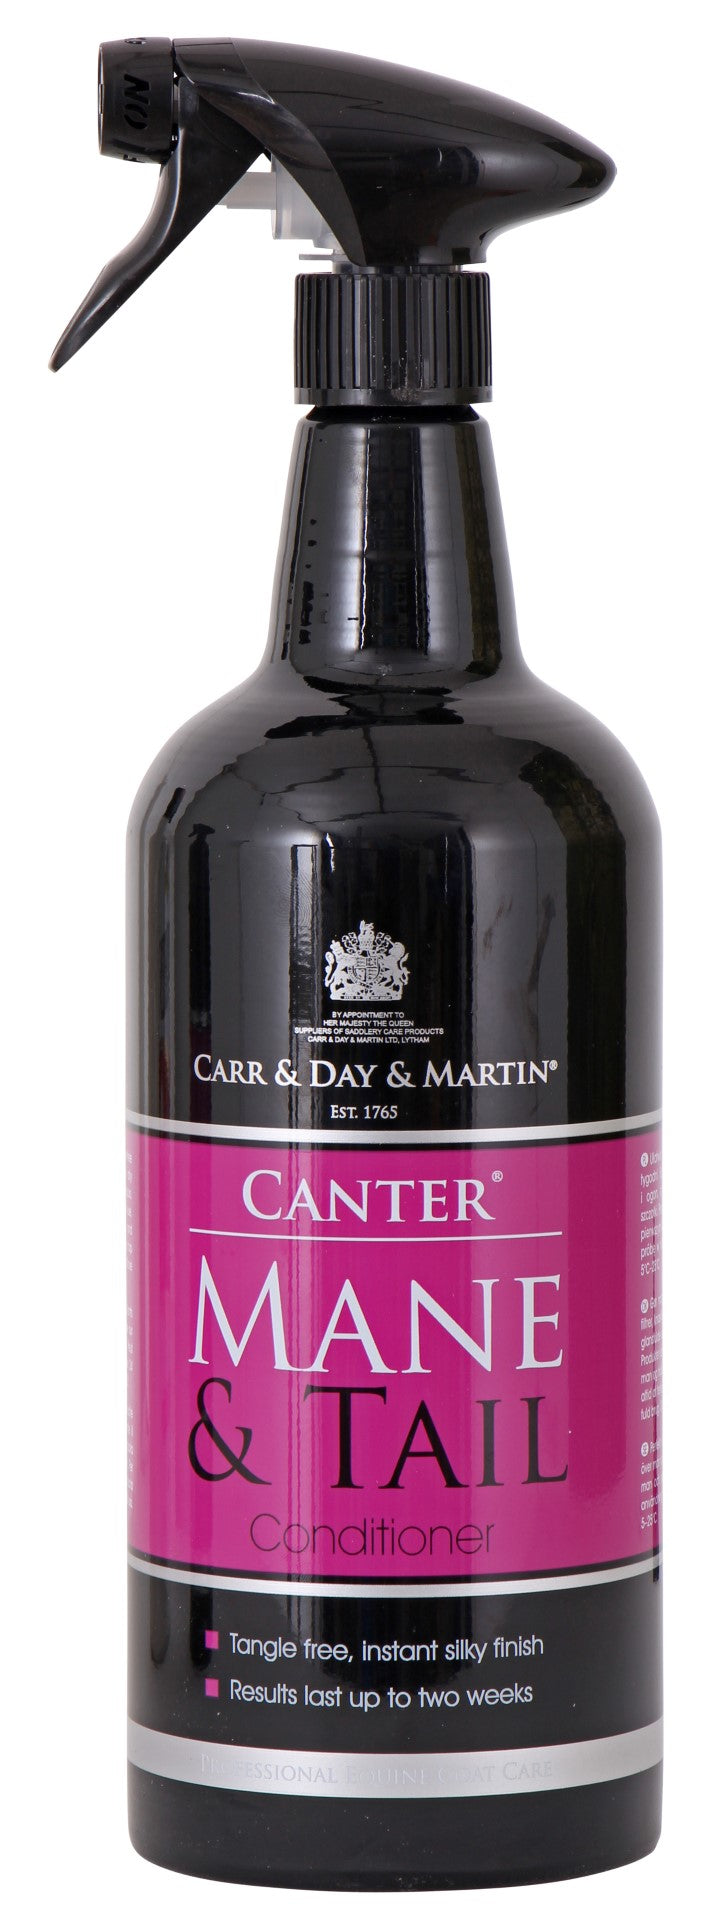 Carr & Day & Martin - Canter Mane & Tail